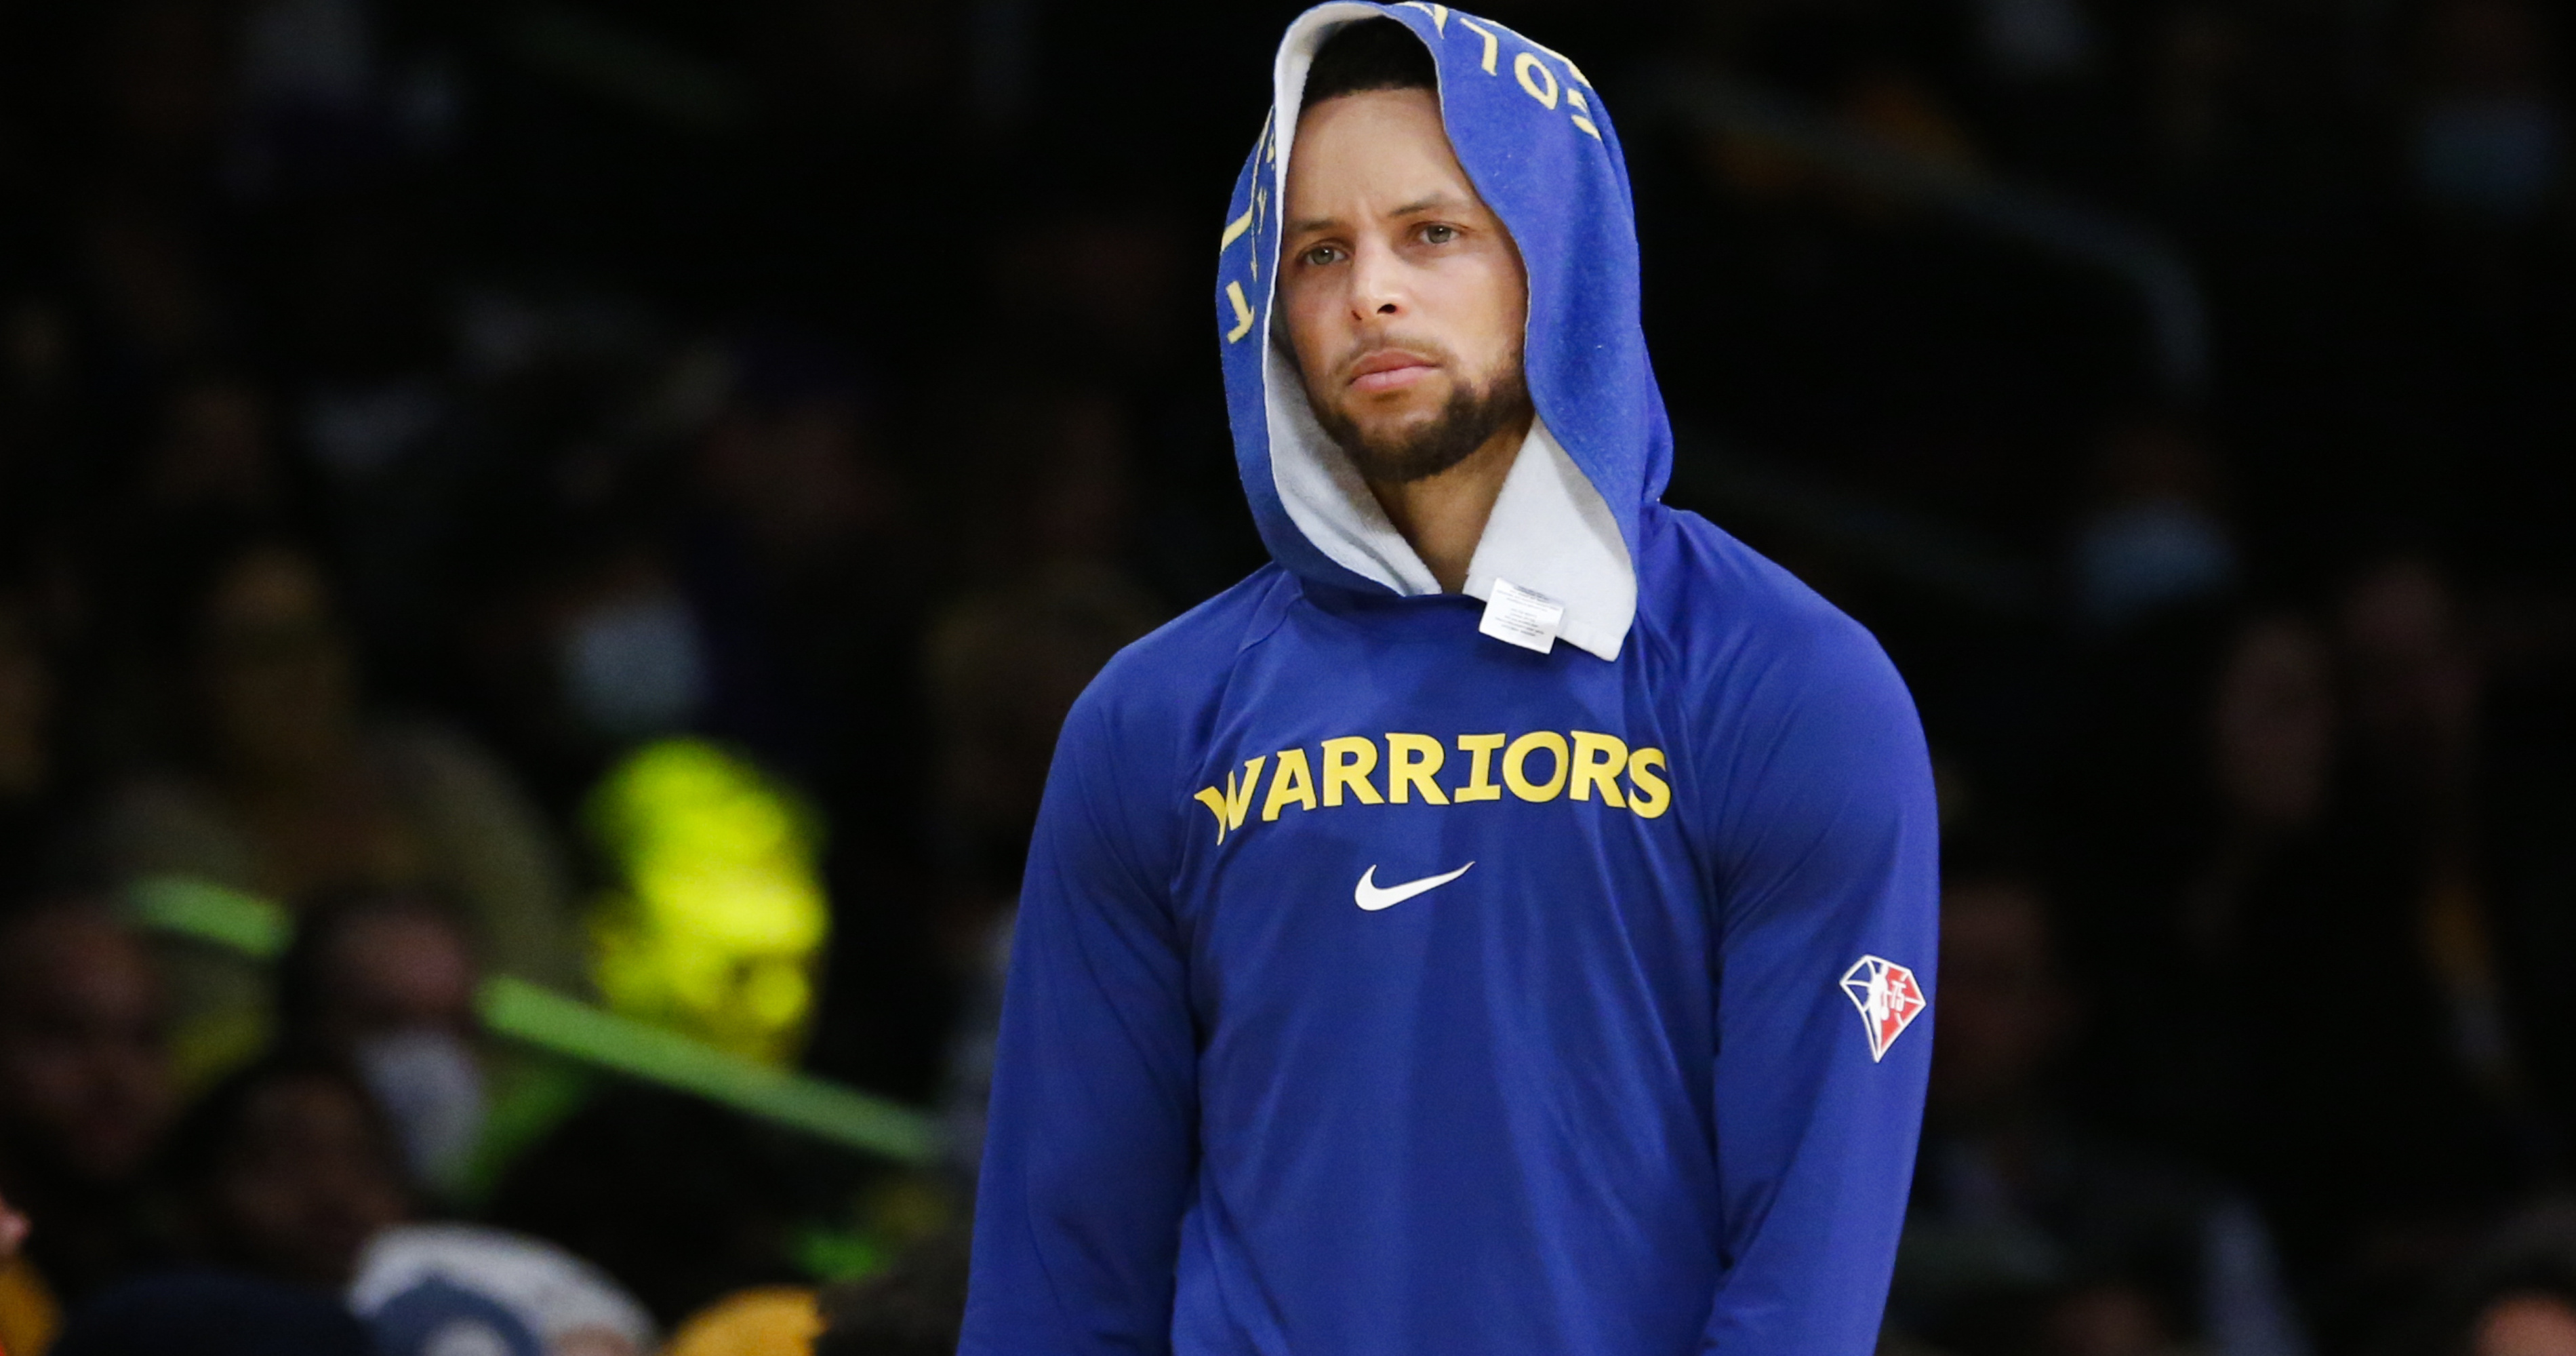 Curry comes up limping after mad scramble in Warriors loss – KGET 17